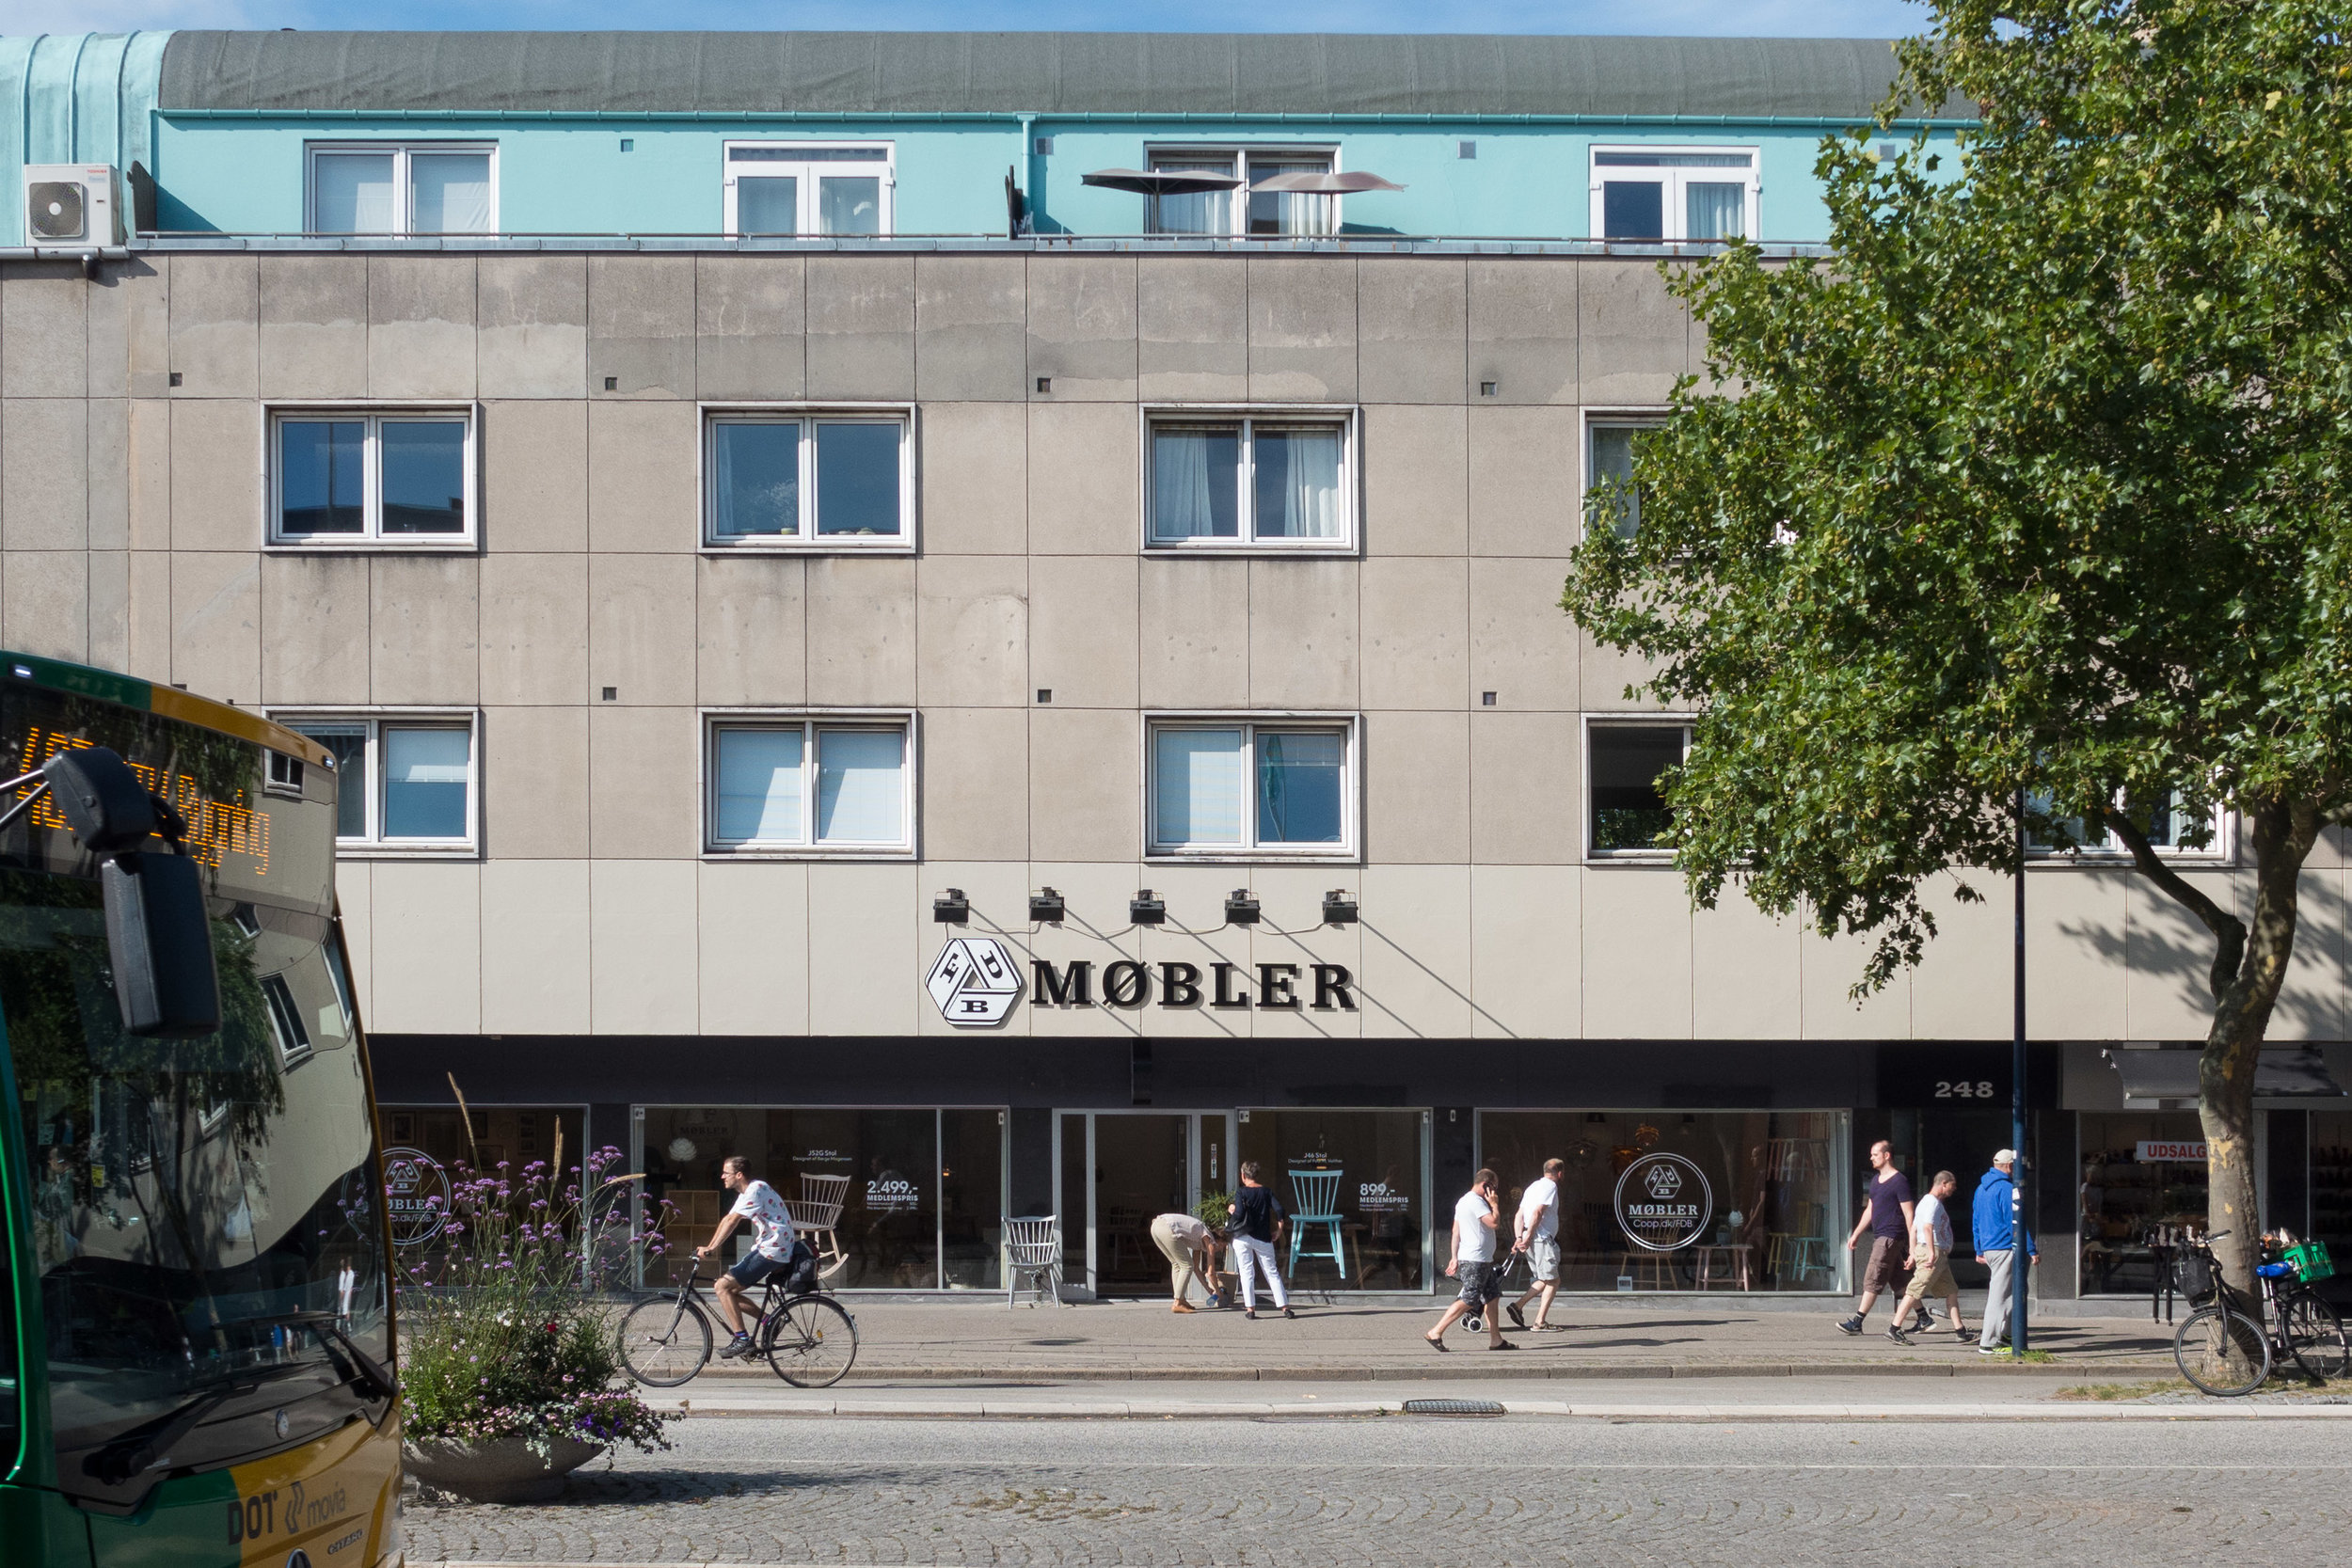 the new FDB furniture store in Lyngby danish architecture and design review